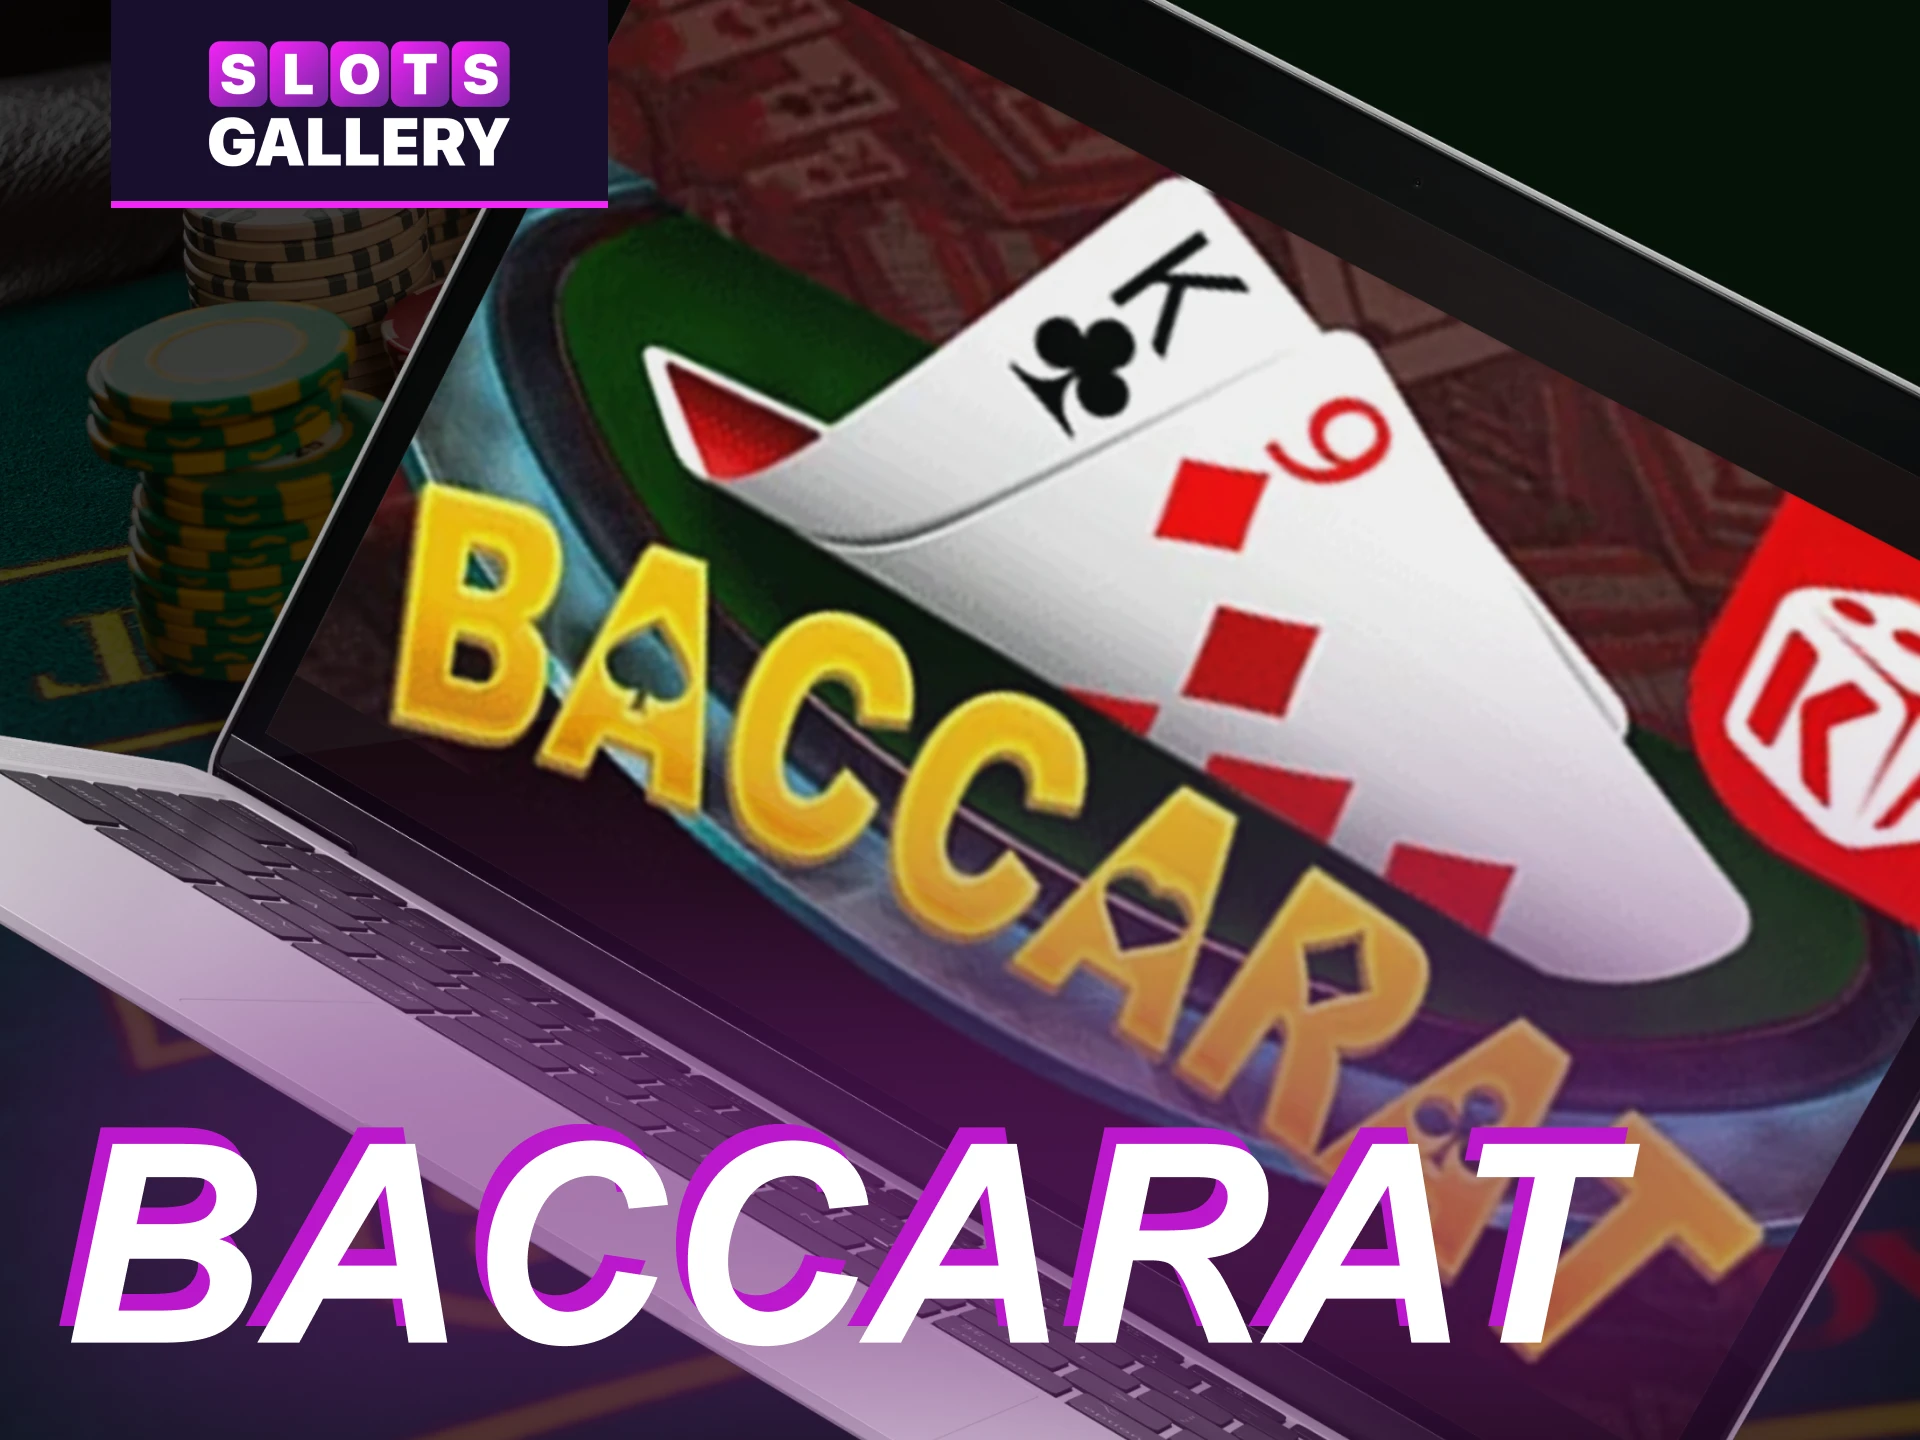 Who participates in the Baccarat game at the Slots Gallery online casino.